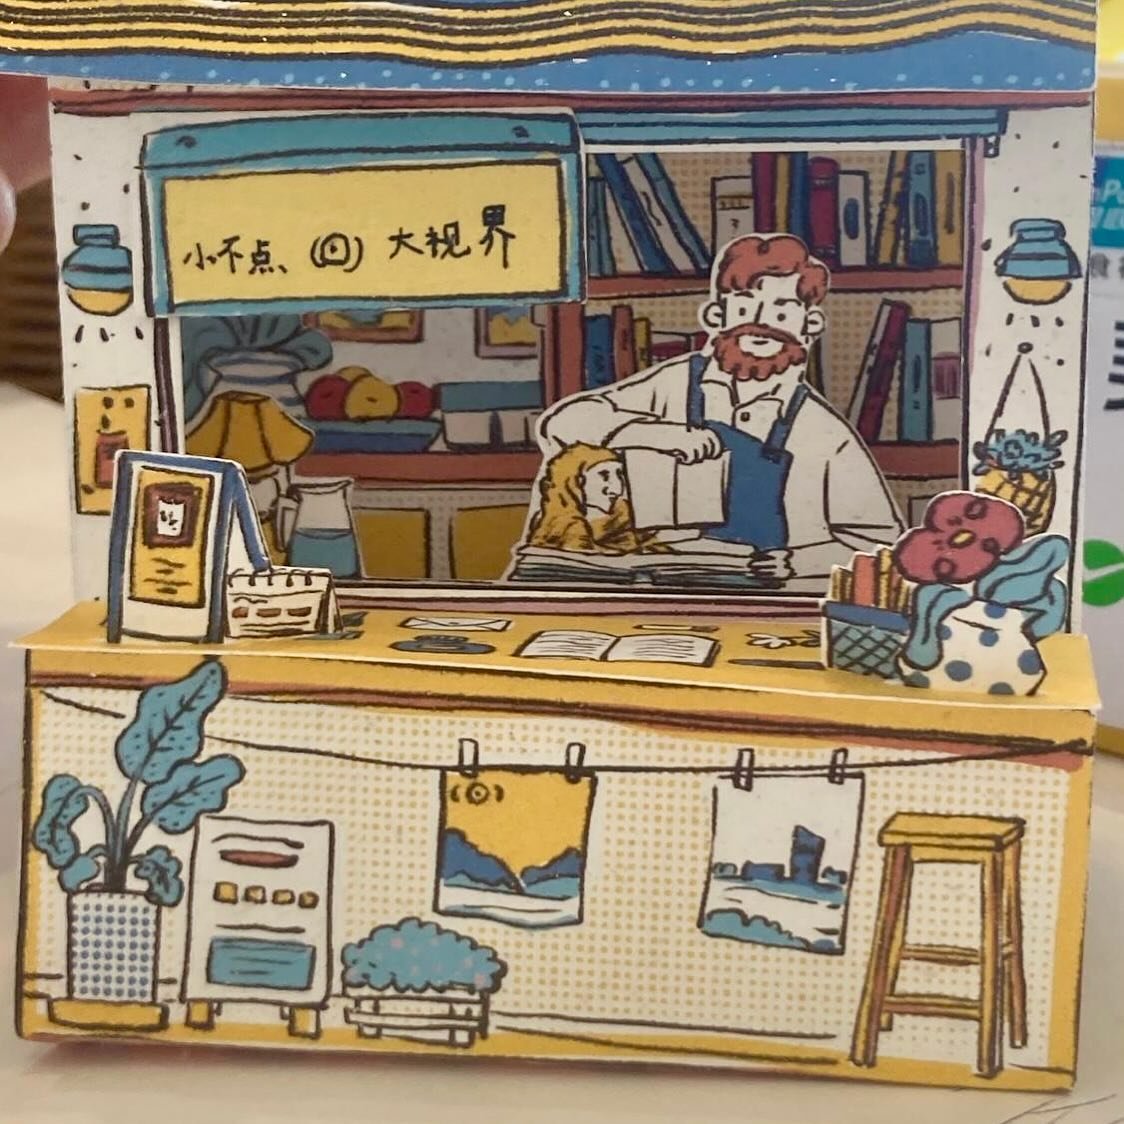 Thought we&rsquo;d discovered all the surprise Bookbinder art at The ASK Beijing, and then on our last day there Hannah met a little girl with this pop-up set who said said &ldquo;hello I make your husband.&rdquo;